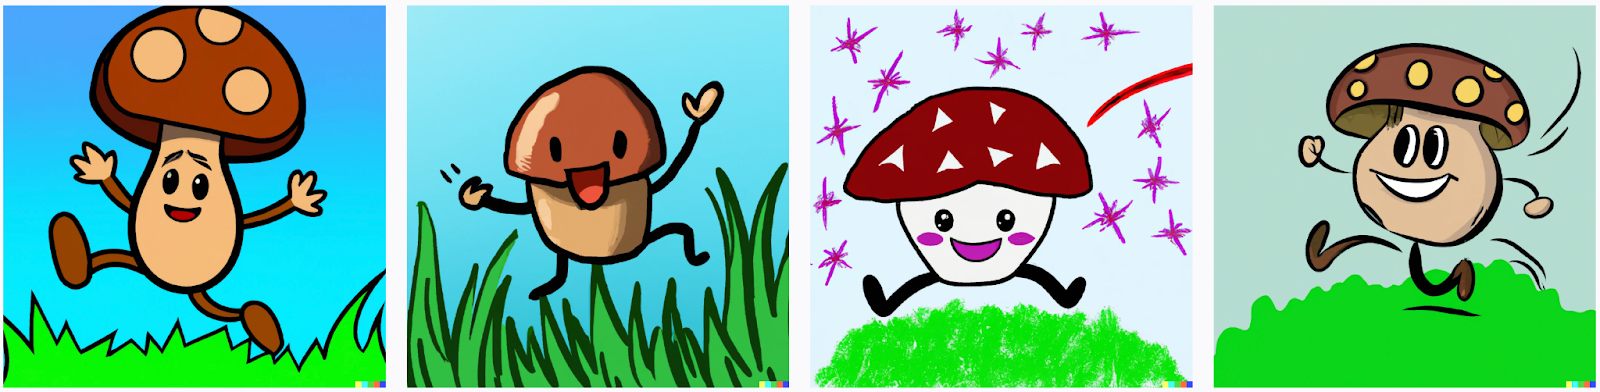 image results for “A happy mushroom skipping through a meadow” prompt